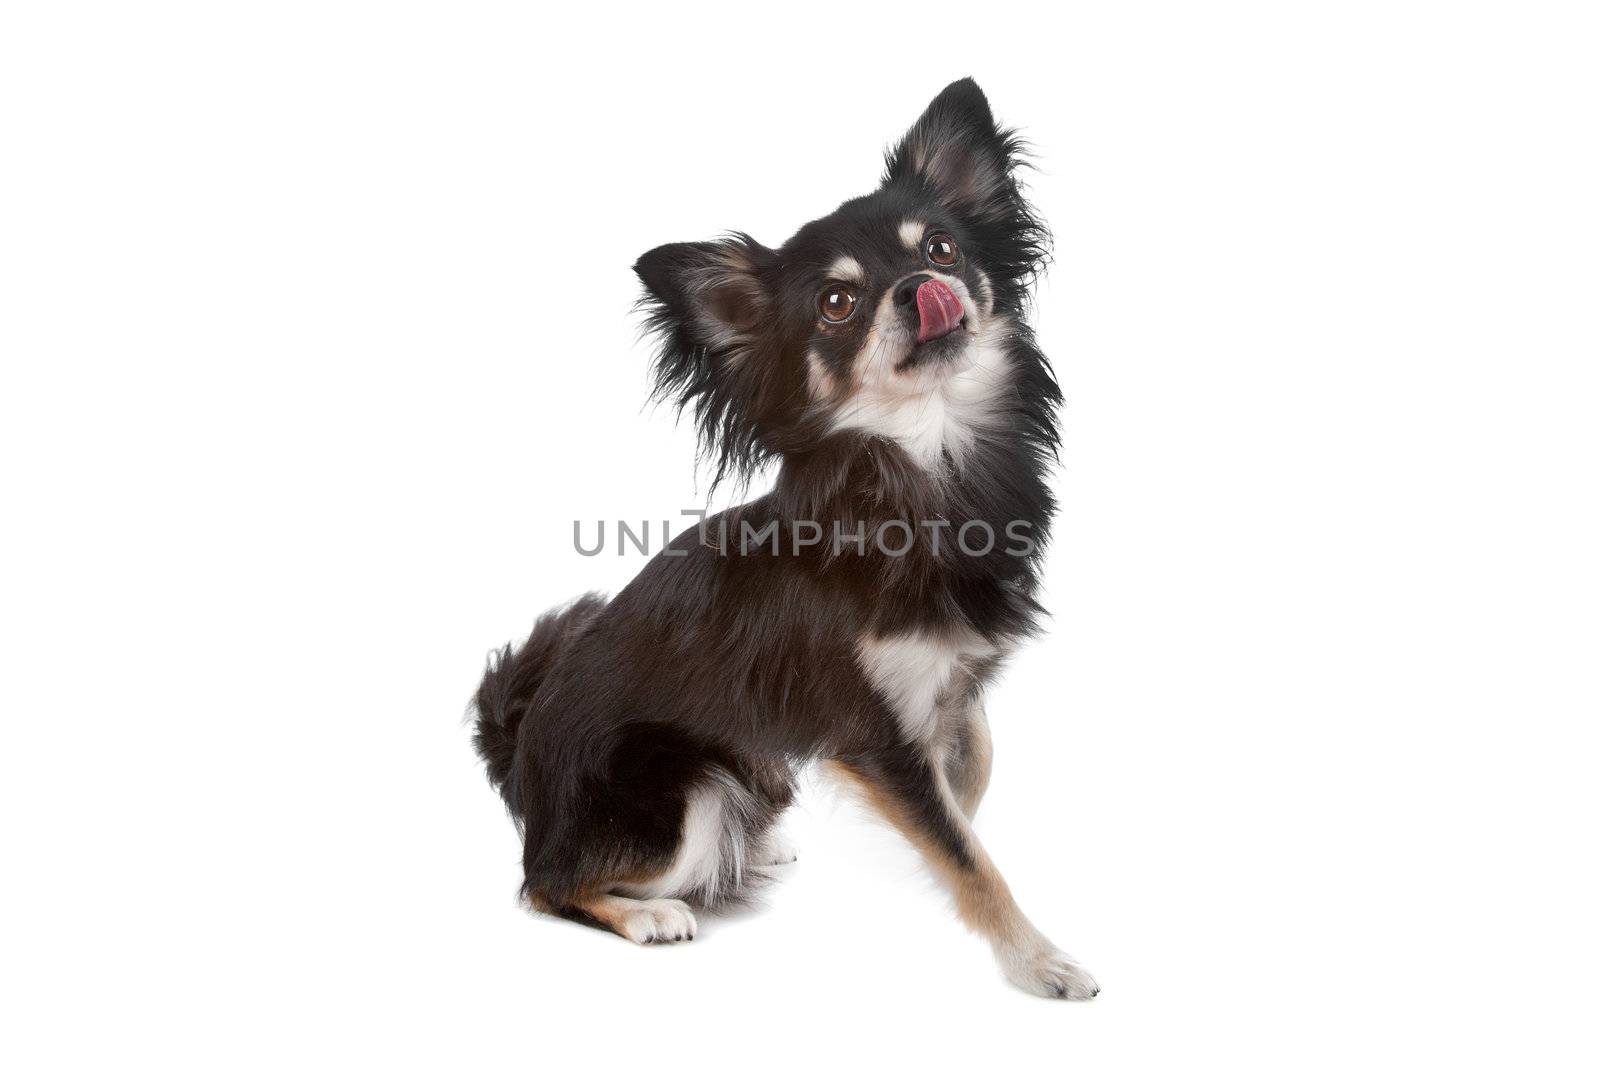 Cute Chihuahua dog with the tongue out, sitting isolated on a white background